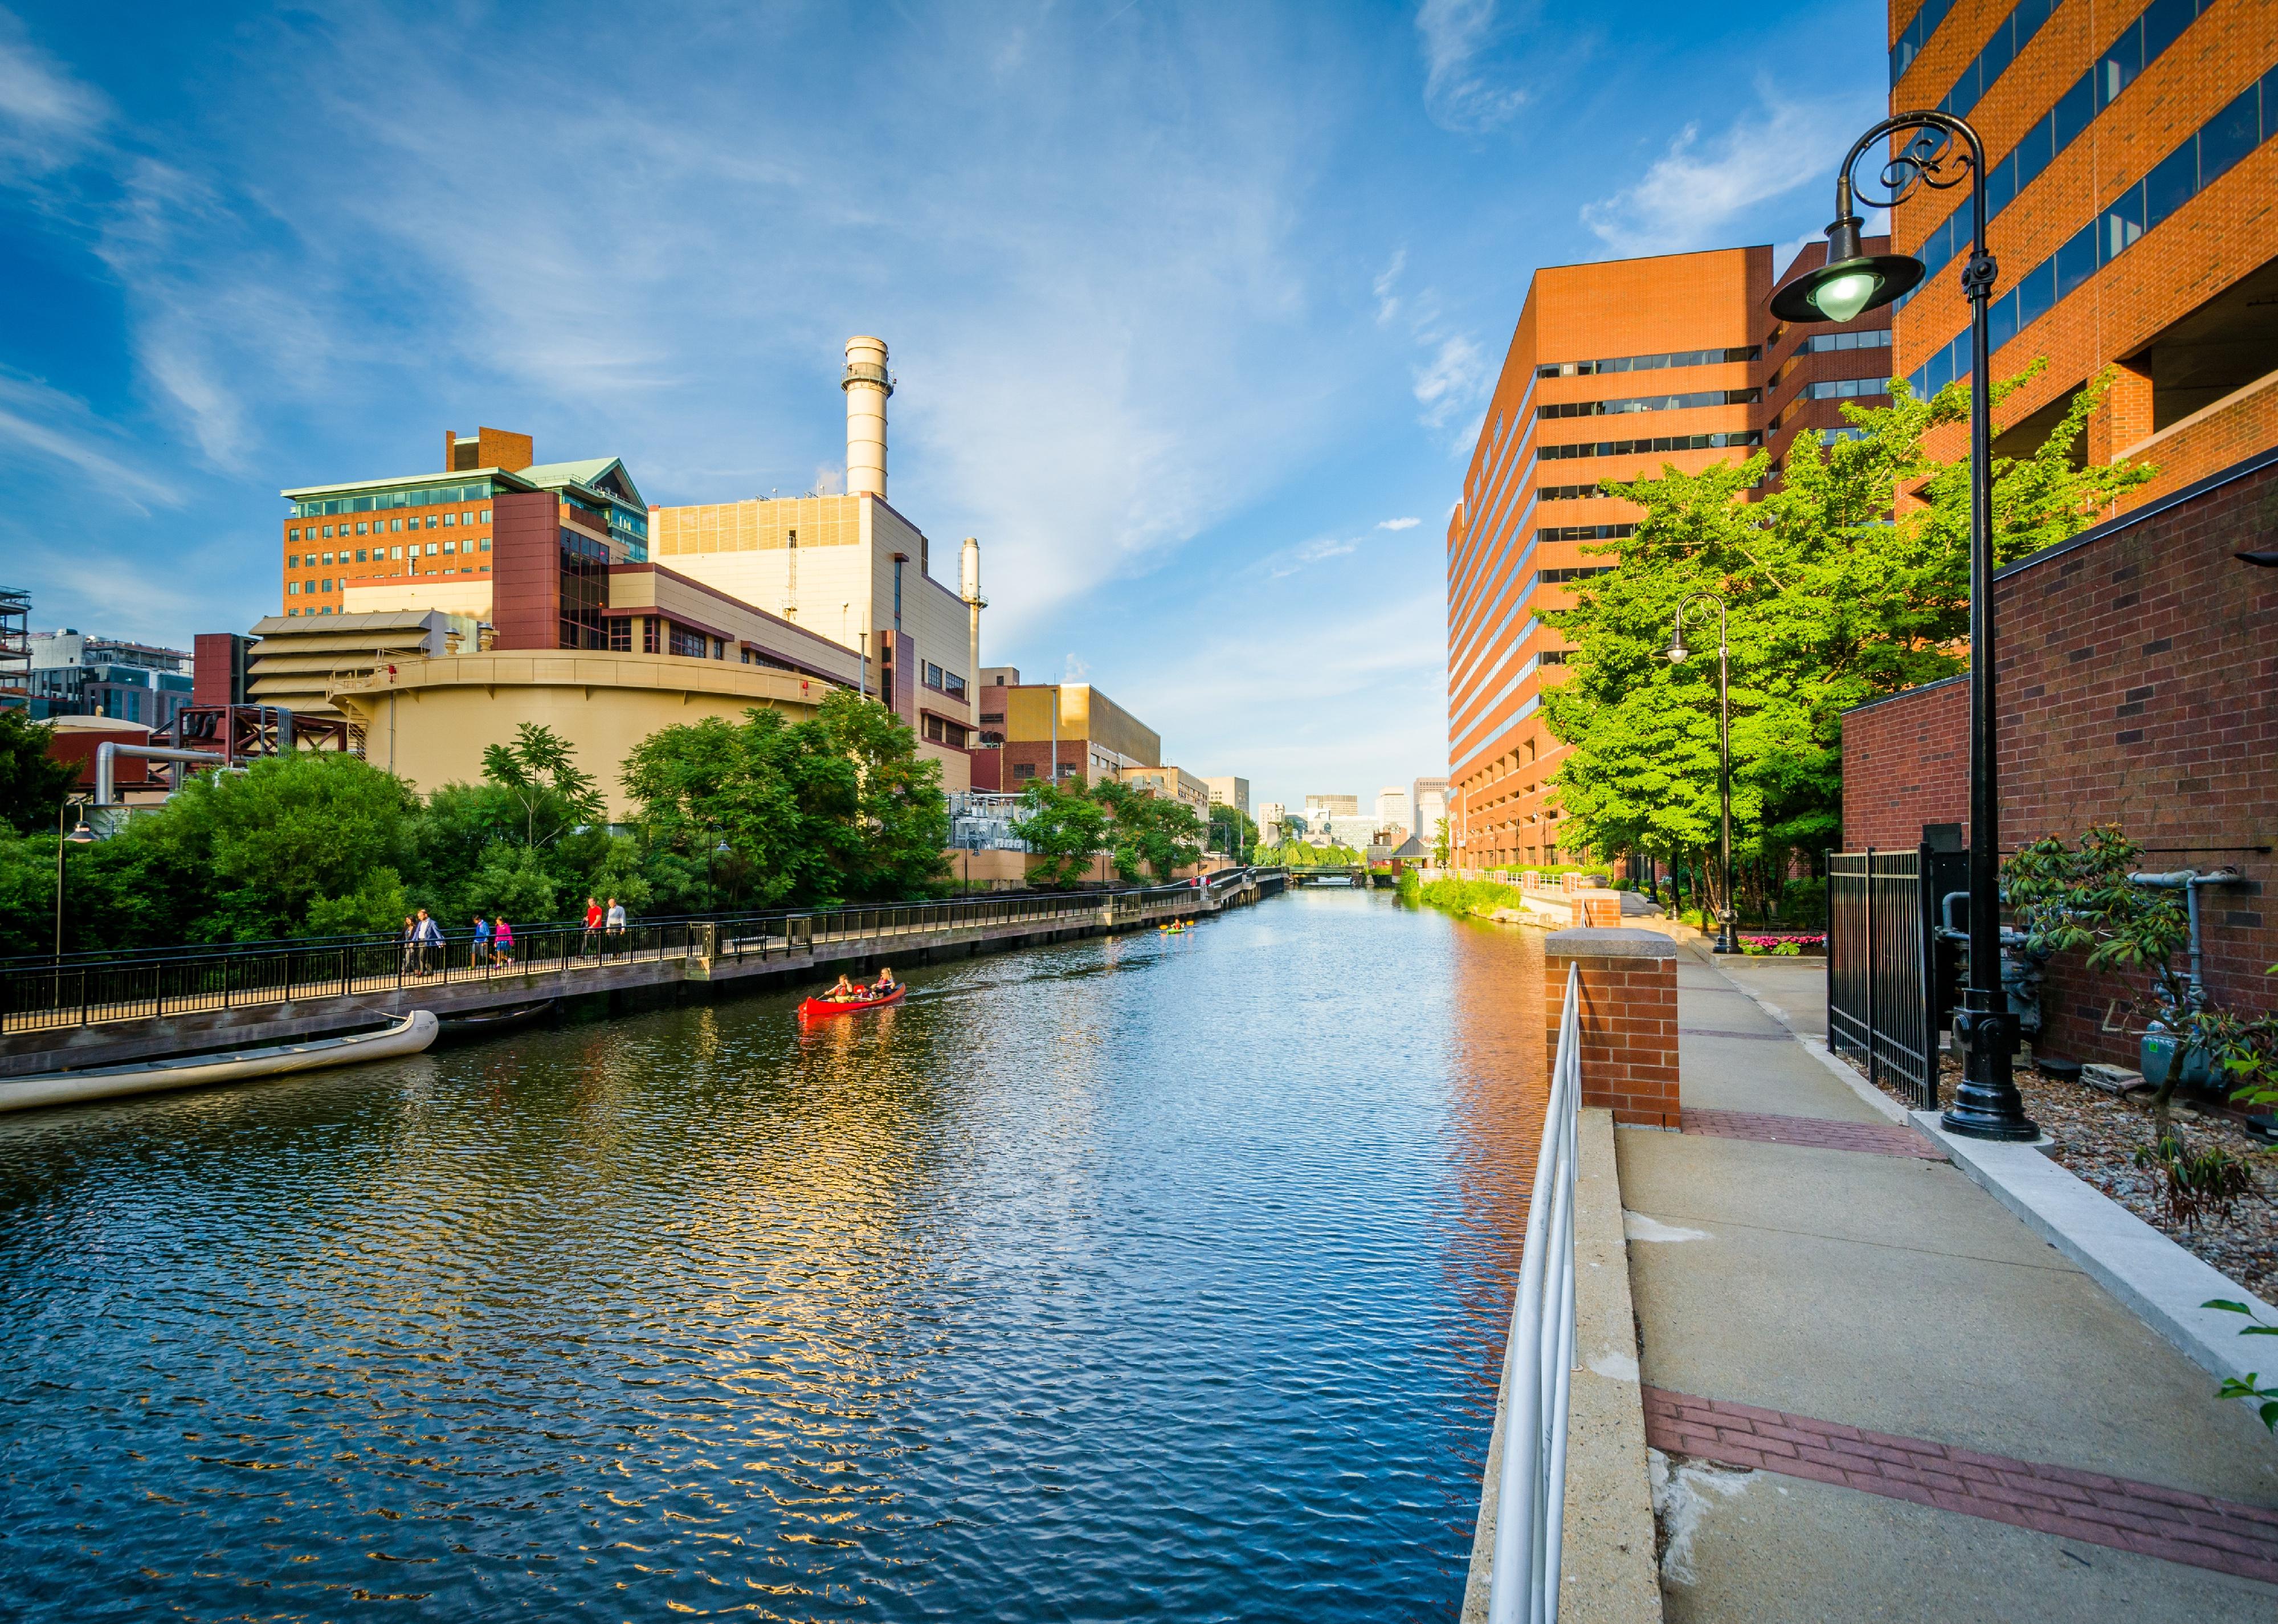 The Broad Canal in Cambridge, Massachusetts